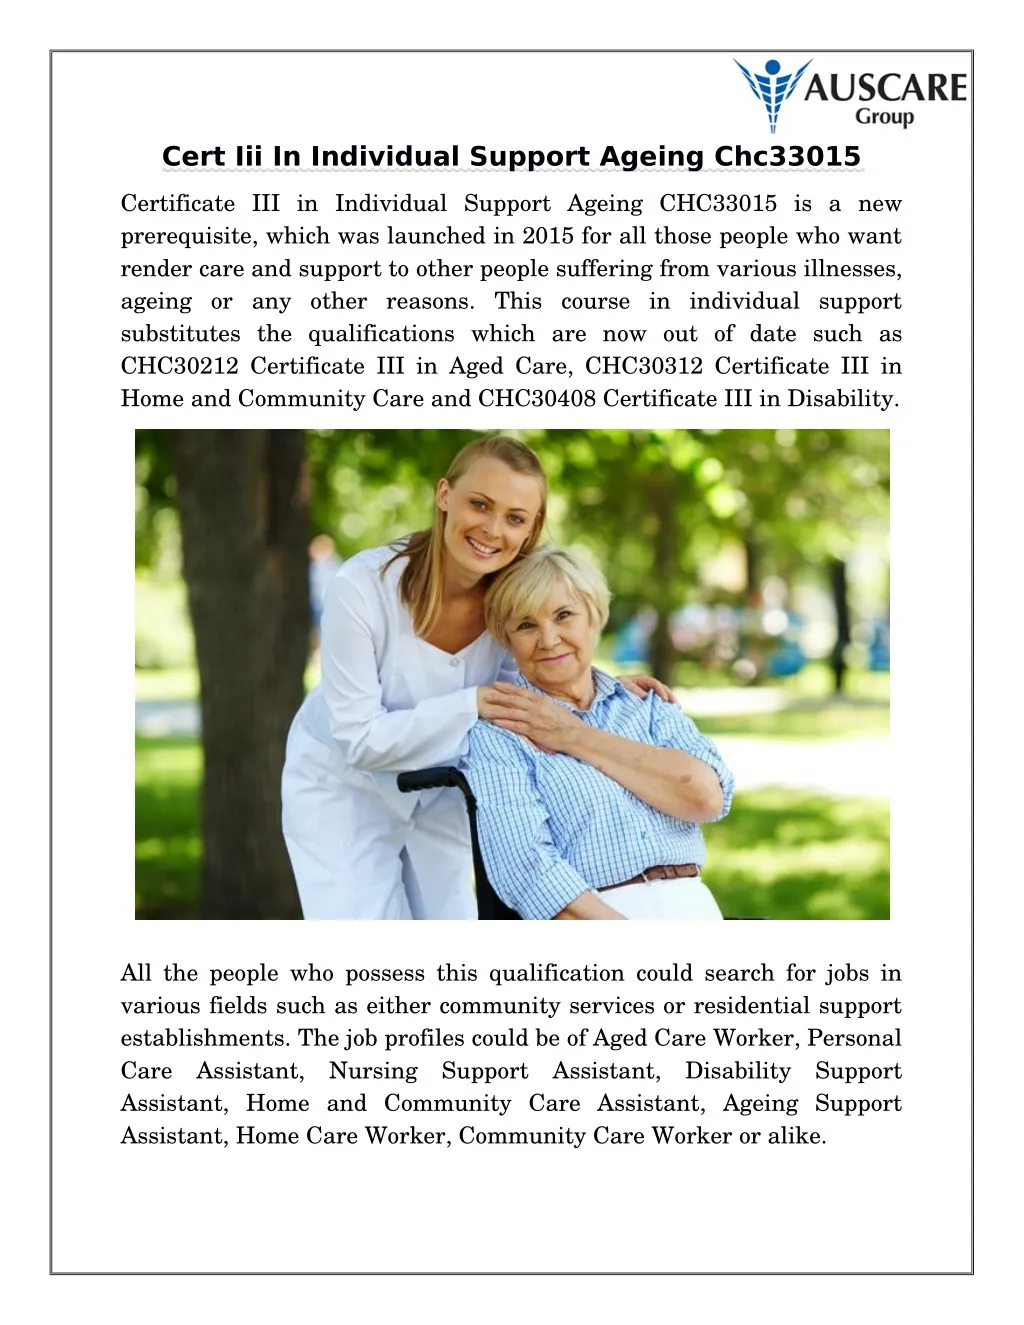 cert iii in individual support ageing chc33015